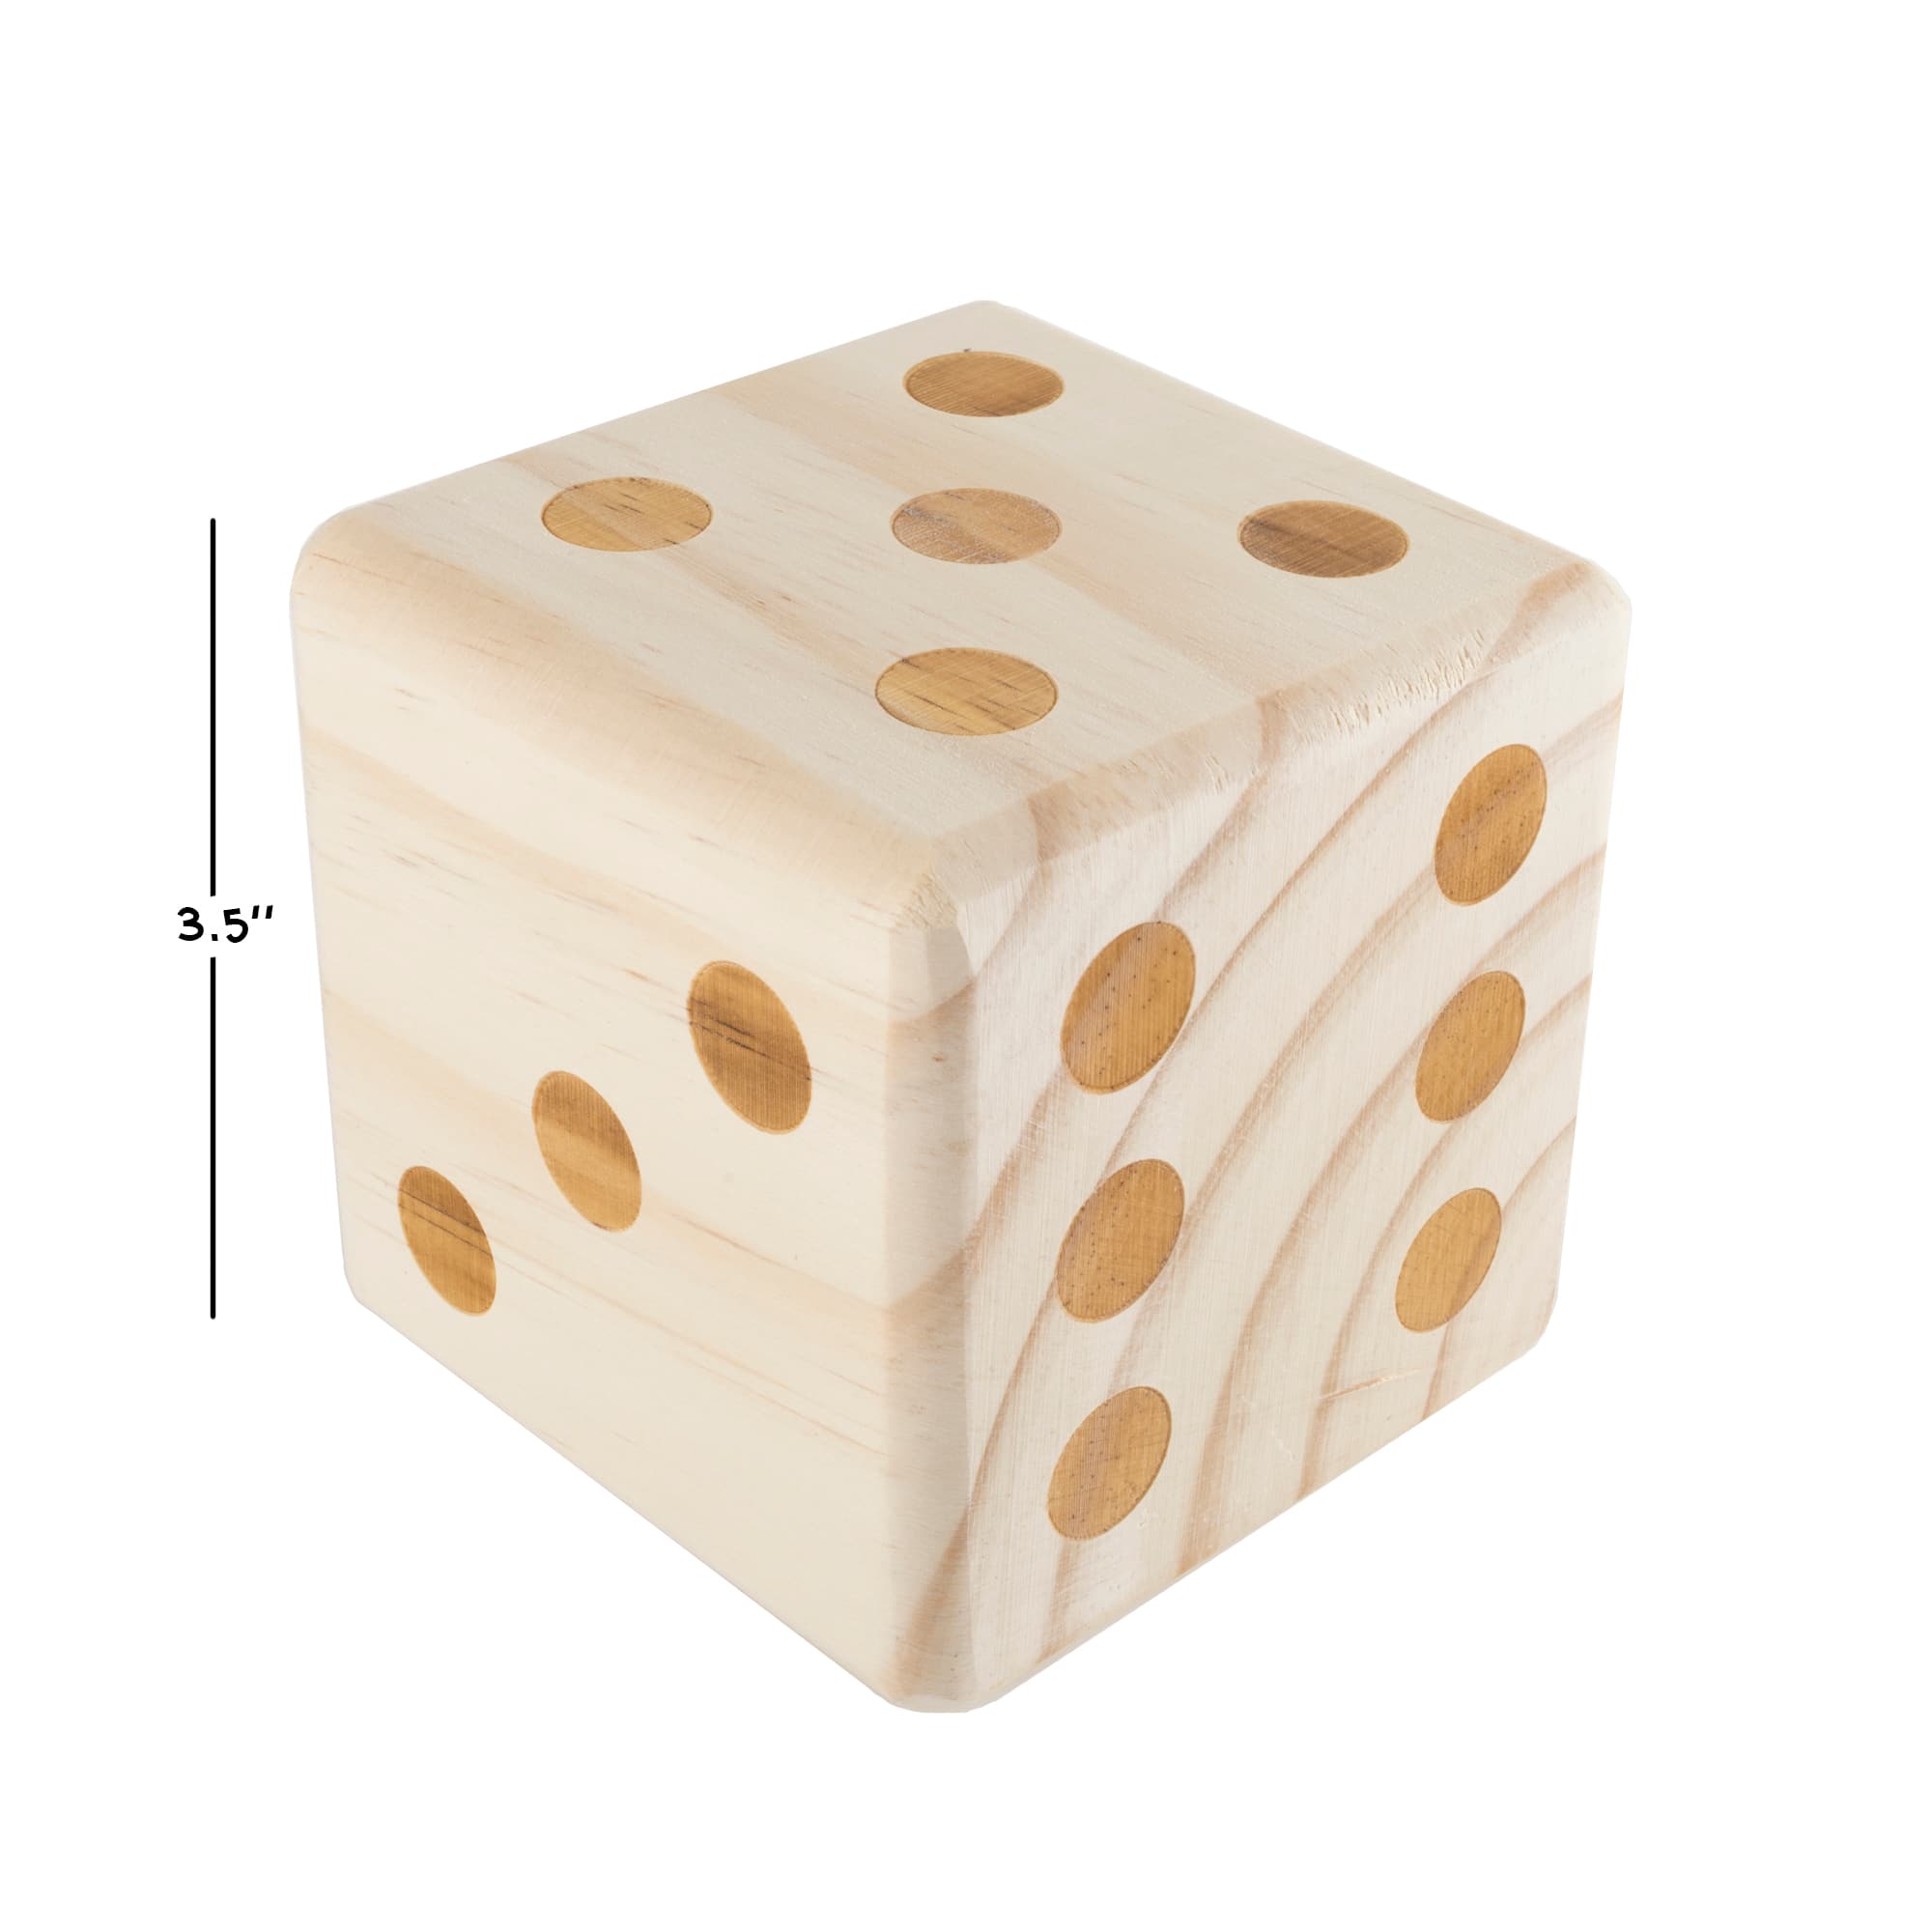 Toy Time Giant Wooden Yard Dice Game